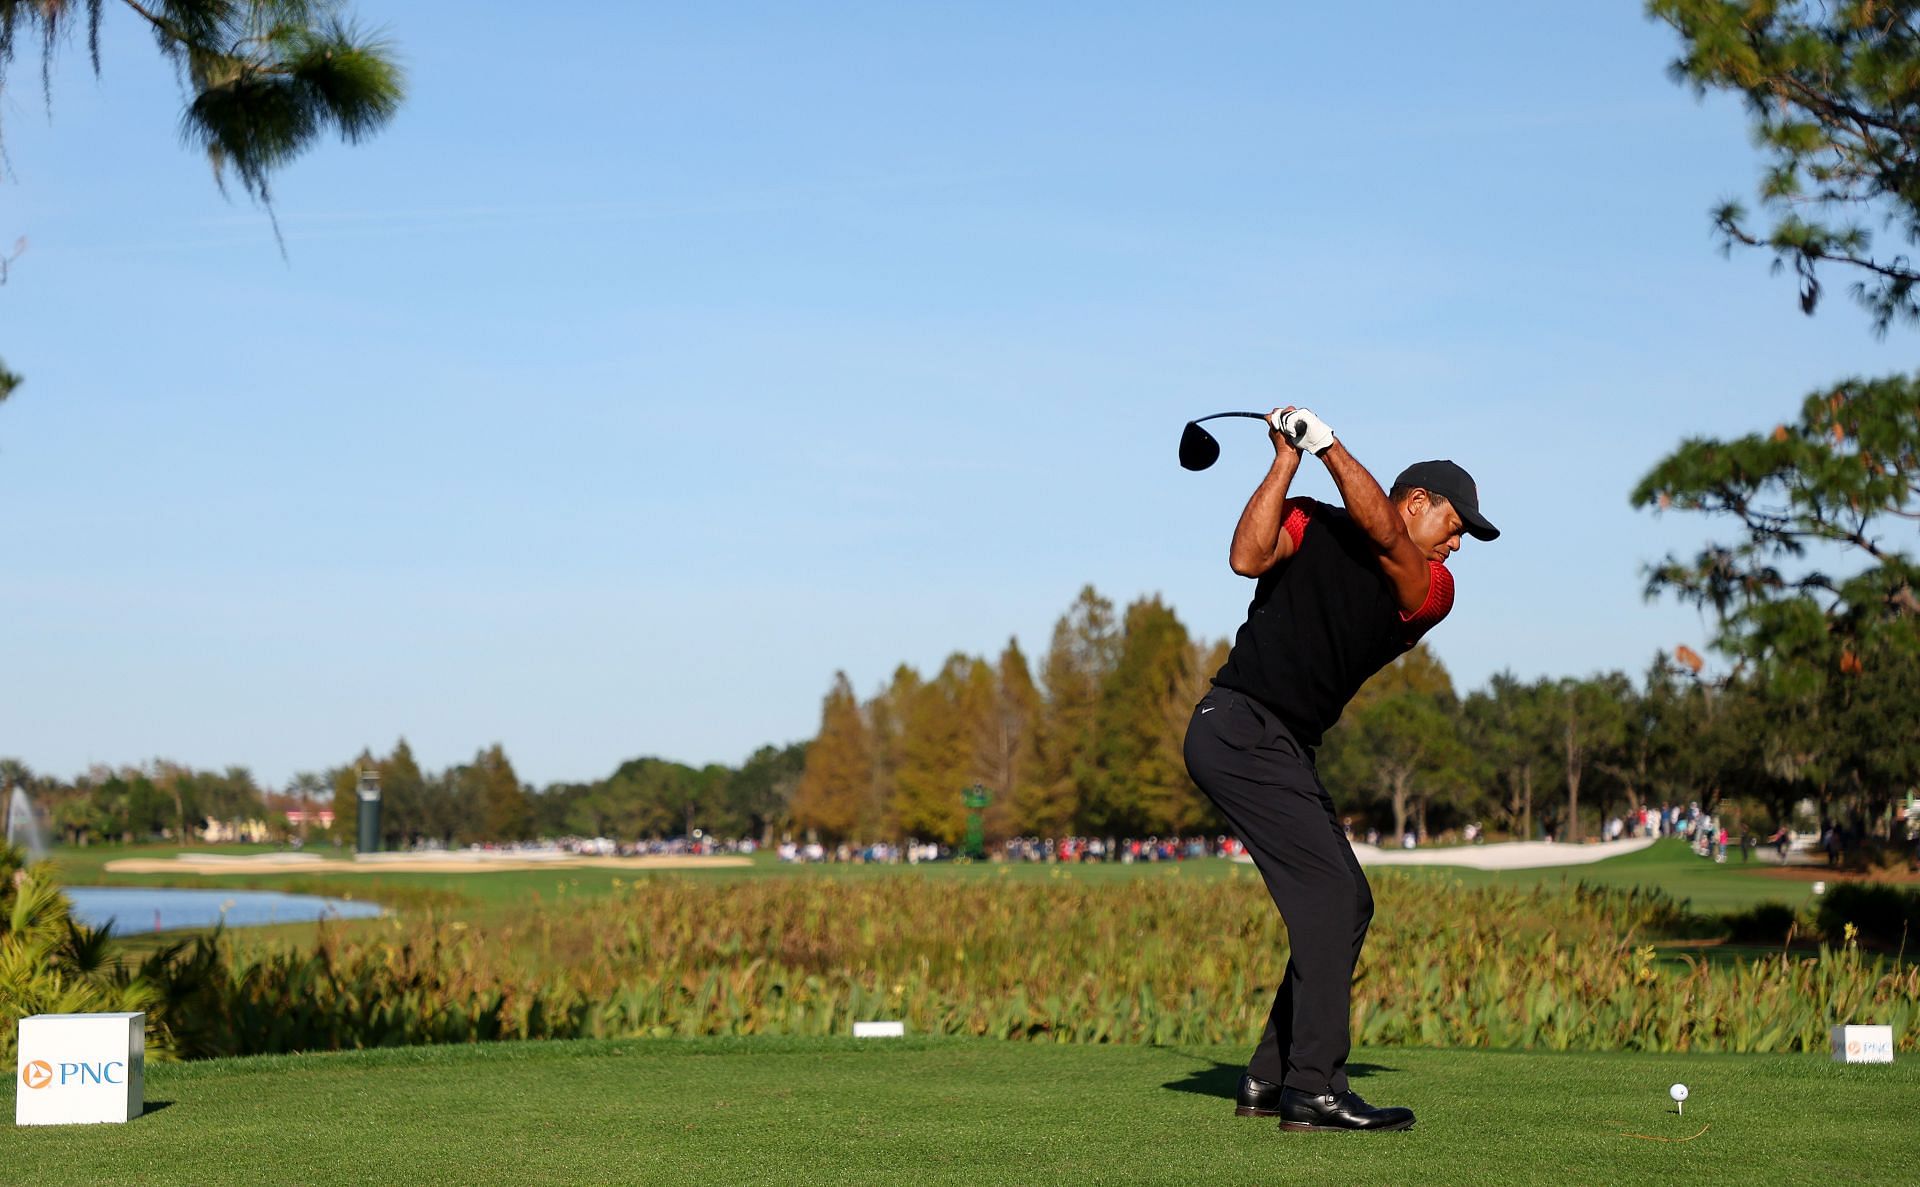 Tiger Woods at the PNC Championship - Final Round (Image via Mike Ehrmann/Getty Images)